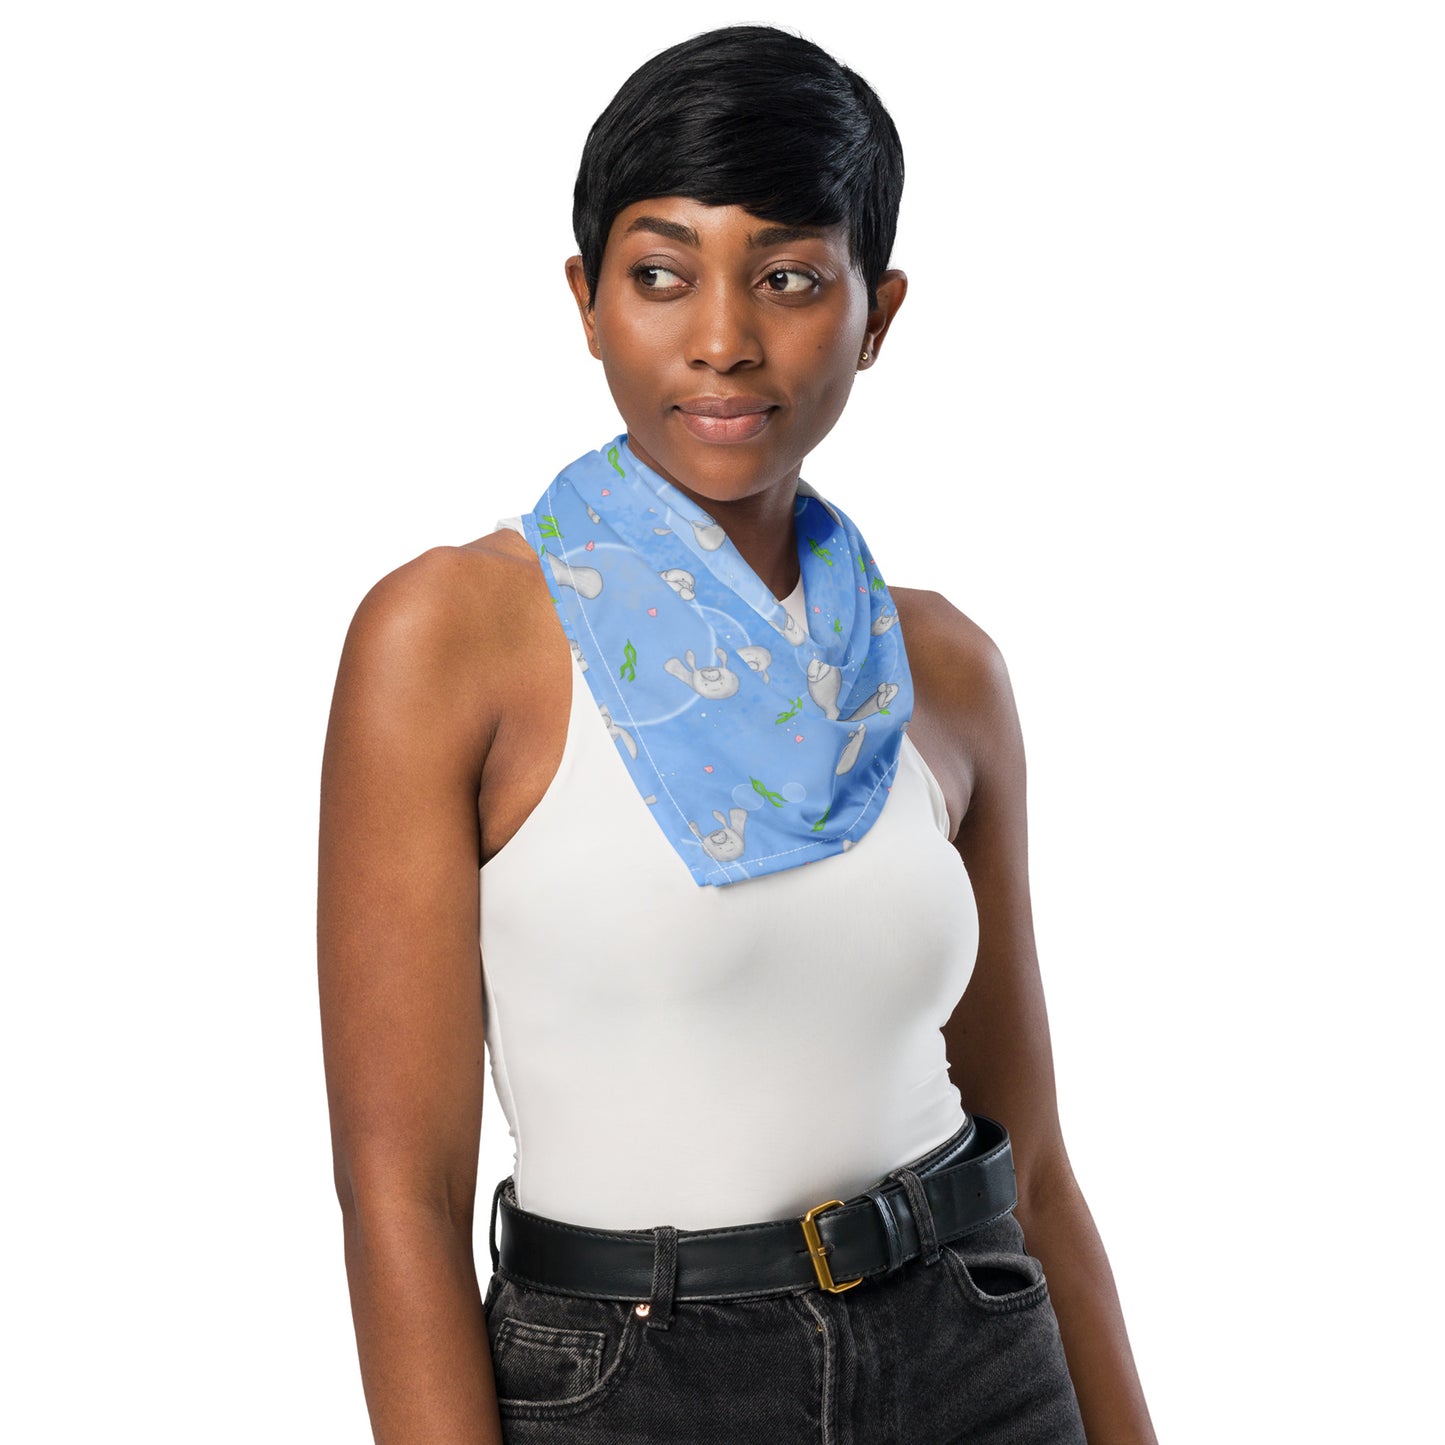 Manatee bandana. Shown as a neck scarf on a female model. Features patterned design of hand-illustrated manatees, seaweed, seashells, and bubbles on a blue  background.